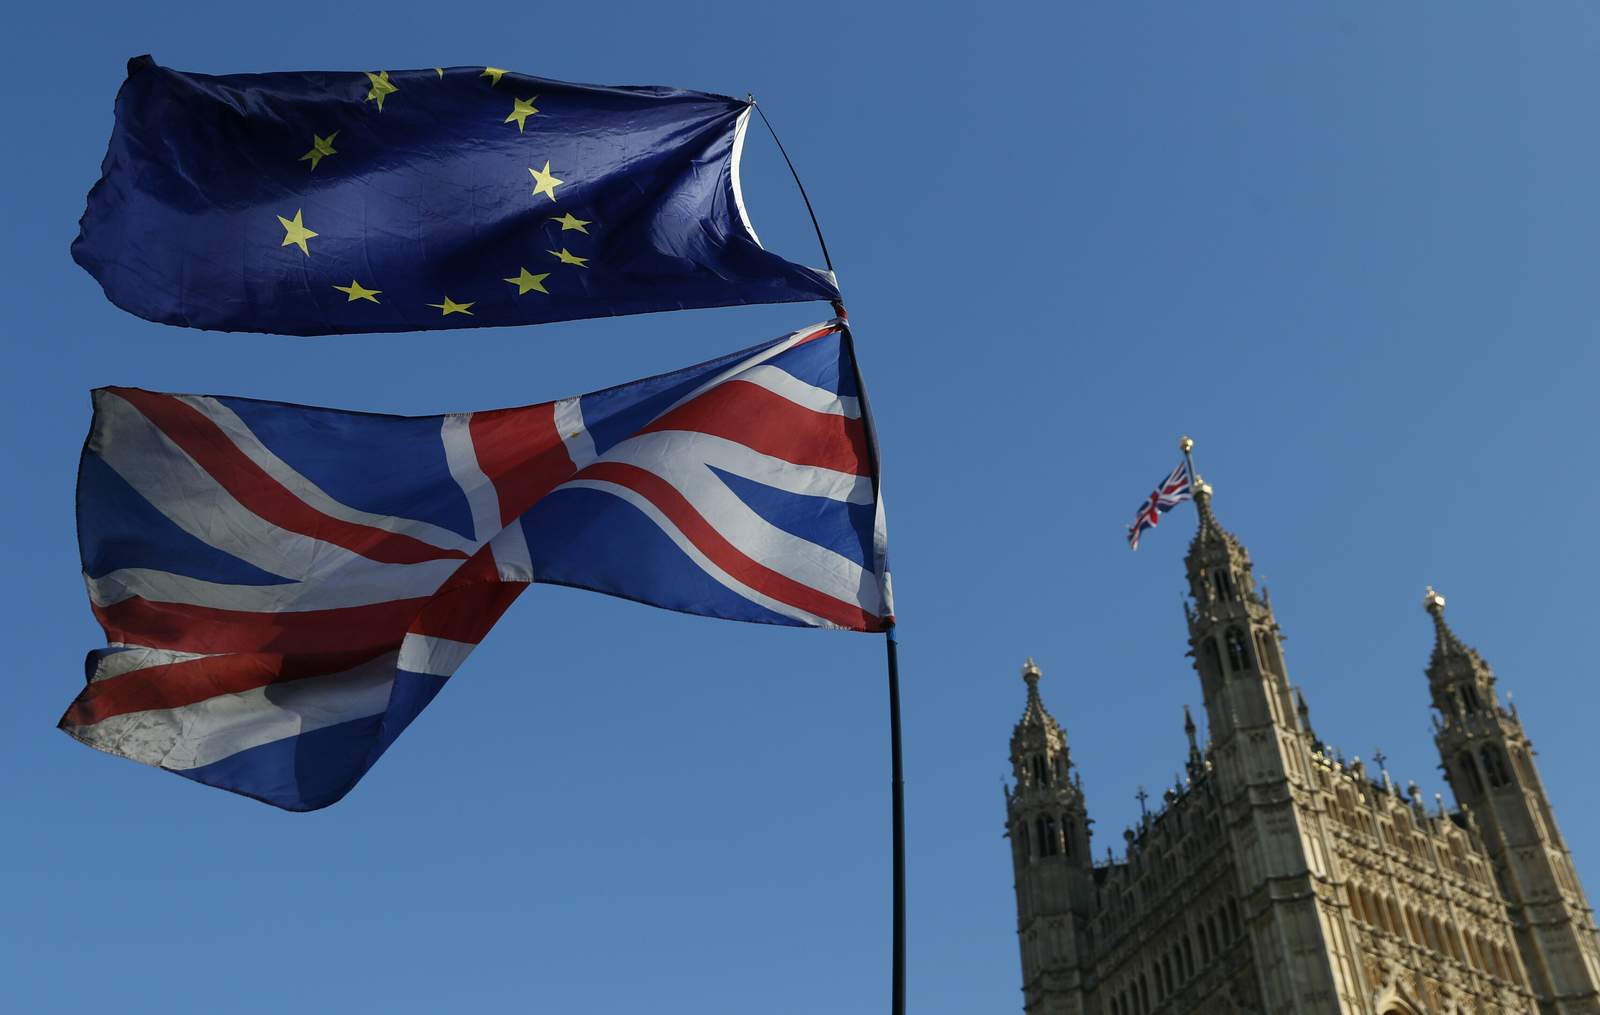 AP Explains: Why are UK and EU still arguing over Brexit?